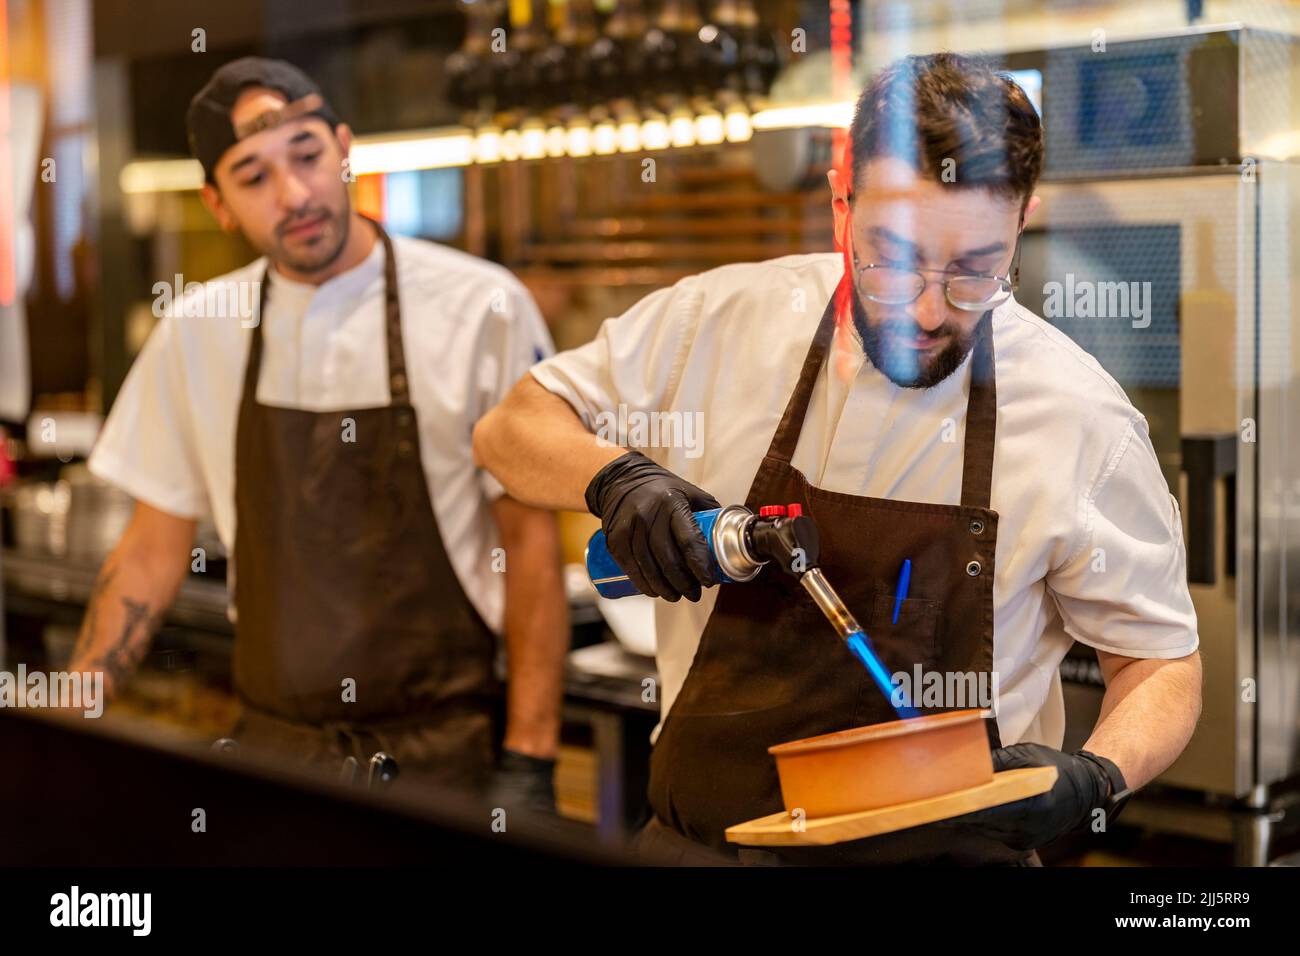 Chef using flaming torch standing with colleague at restaurant Stock Photo